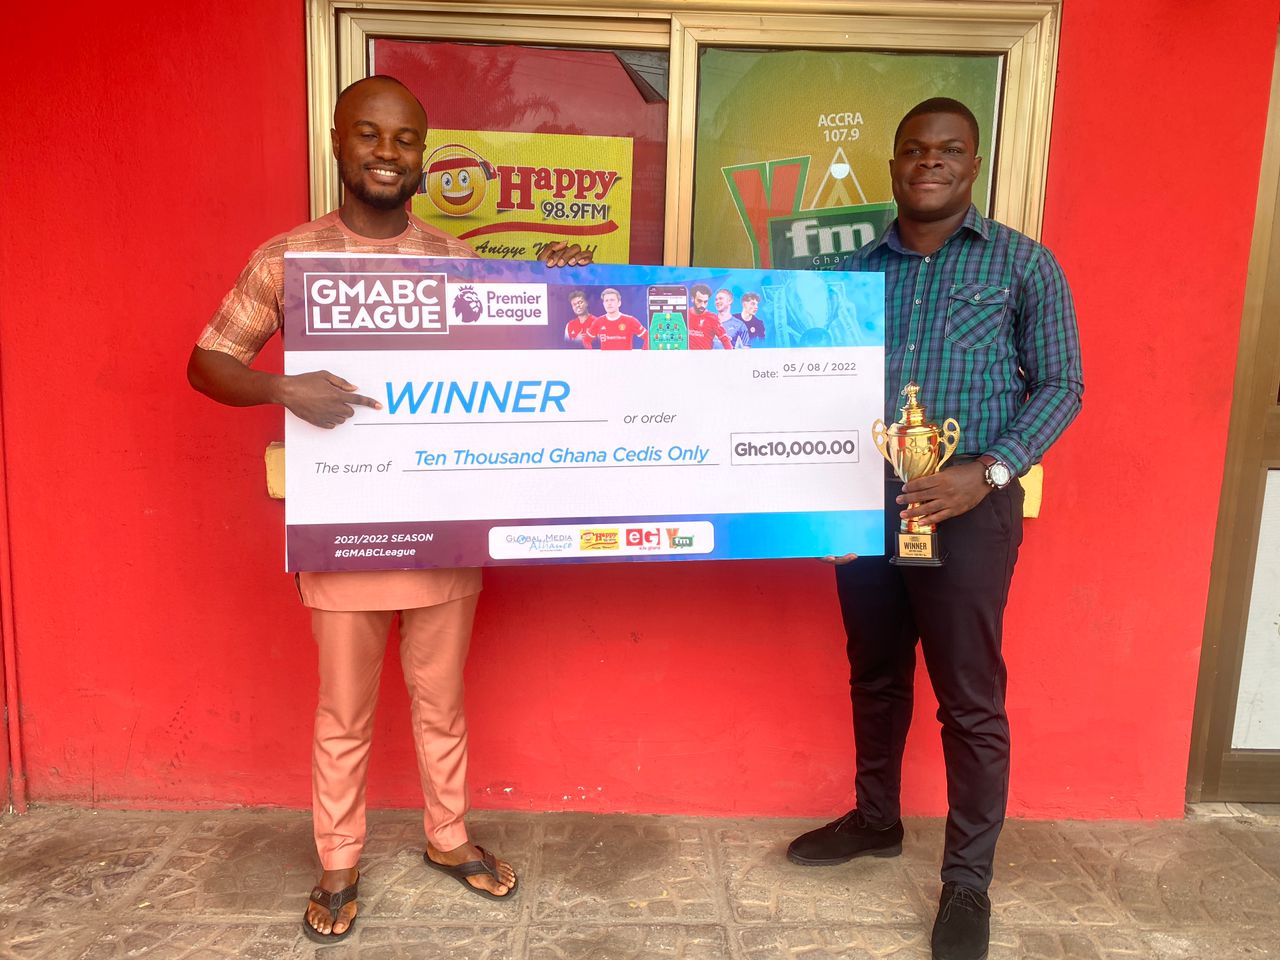 GMABC Fantasy League: Papa Amos-Abanyie pockets Ghc10,000 as winner of the 2021-2022 edition